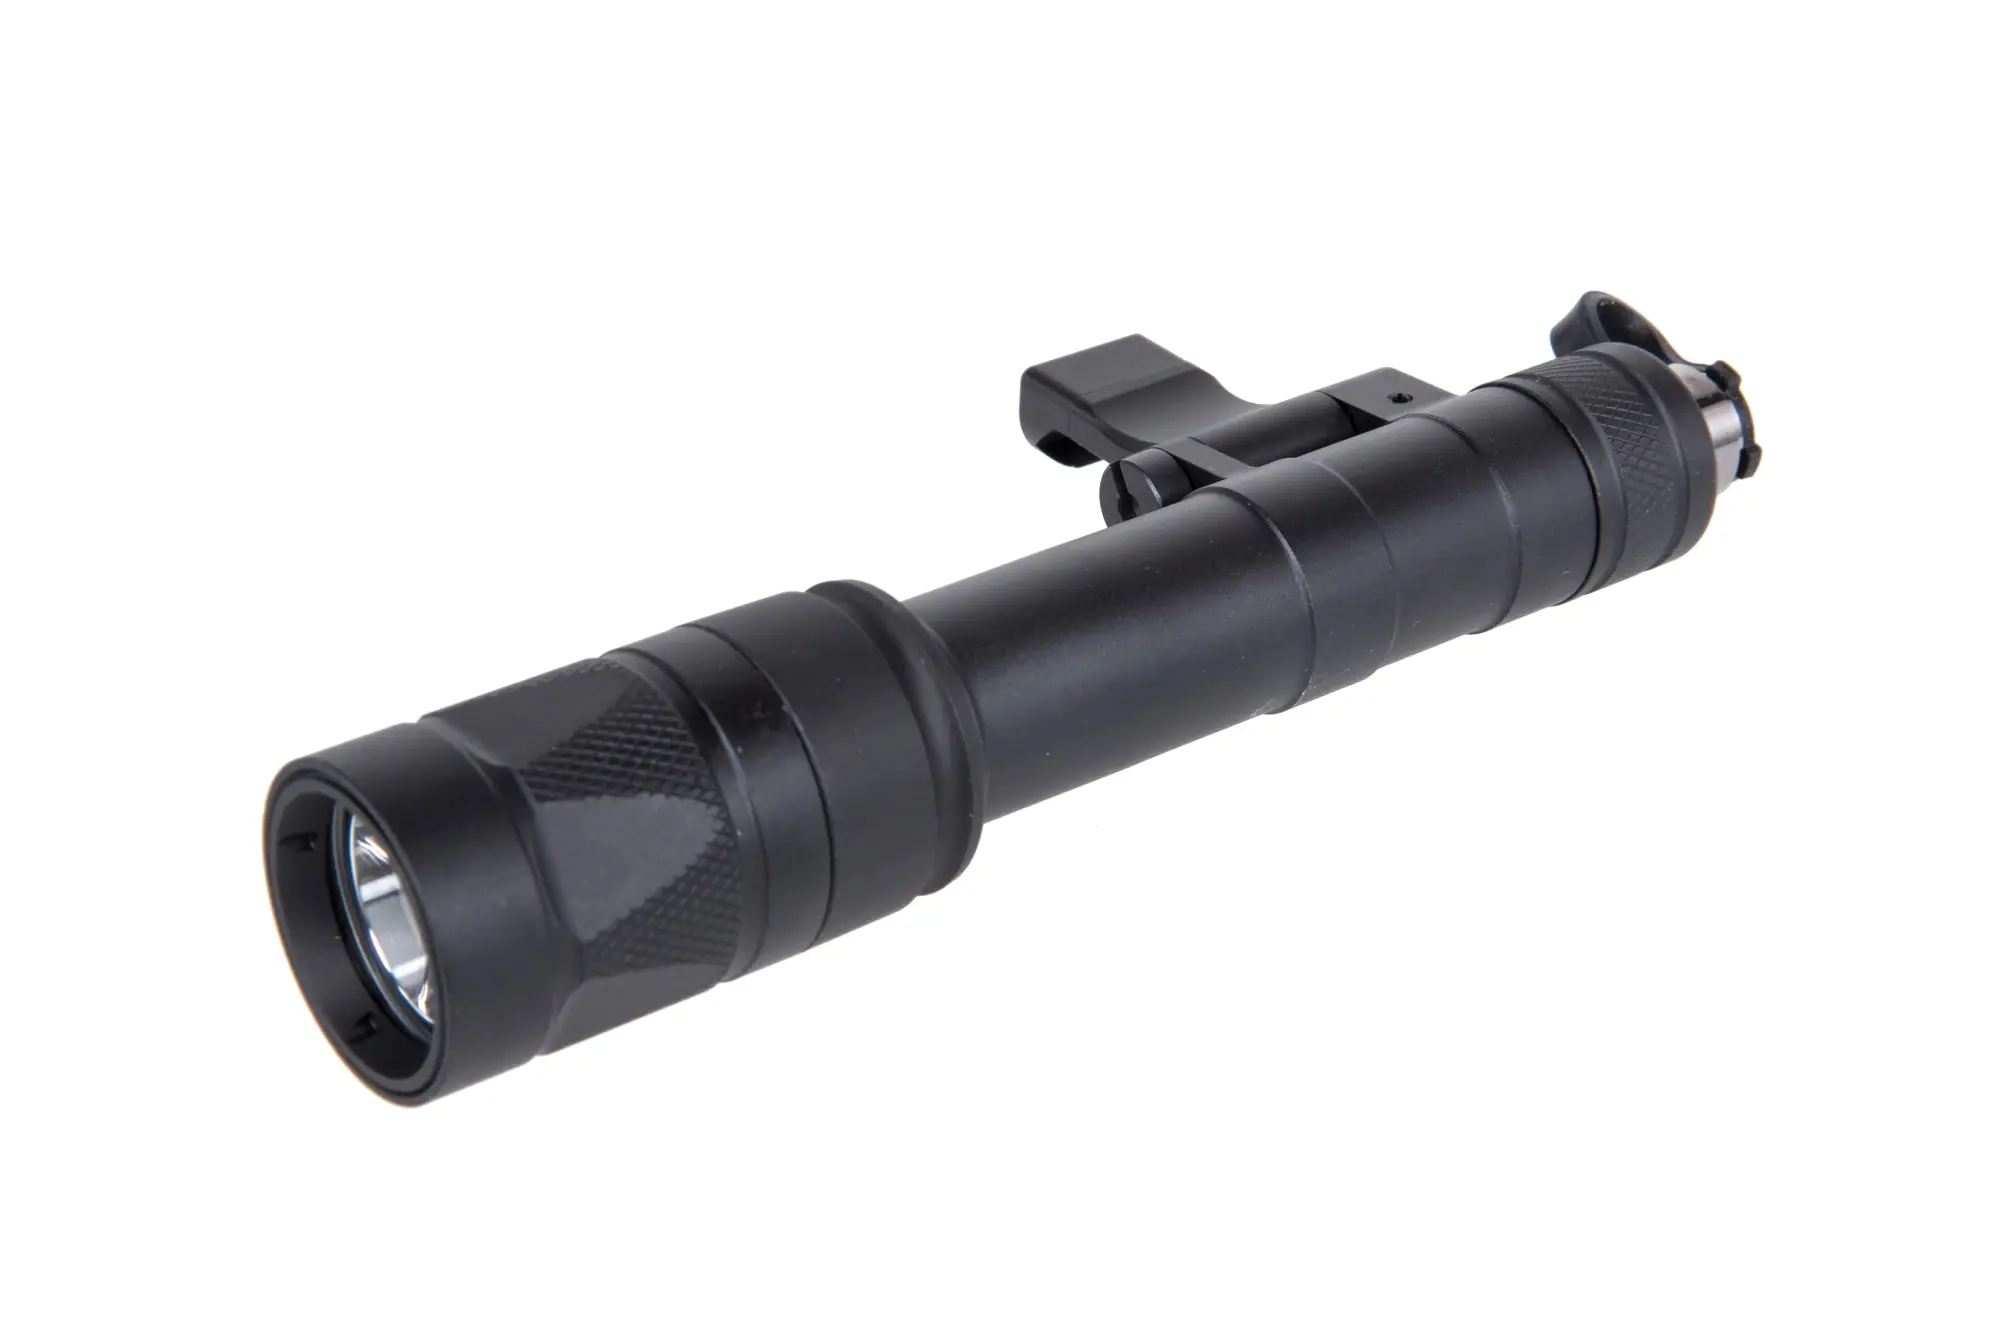 WADSN M640W Scout Light PRO LED valaisin - musta